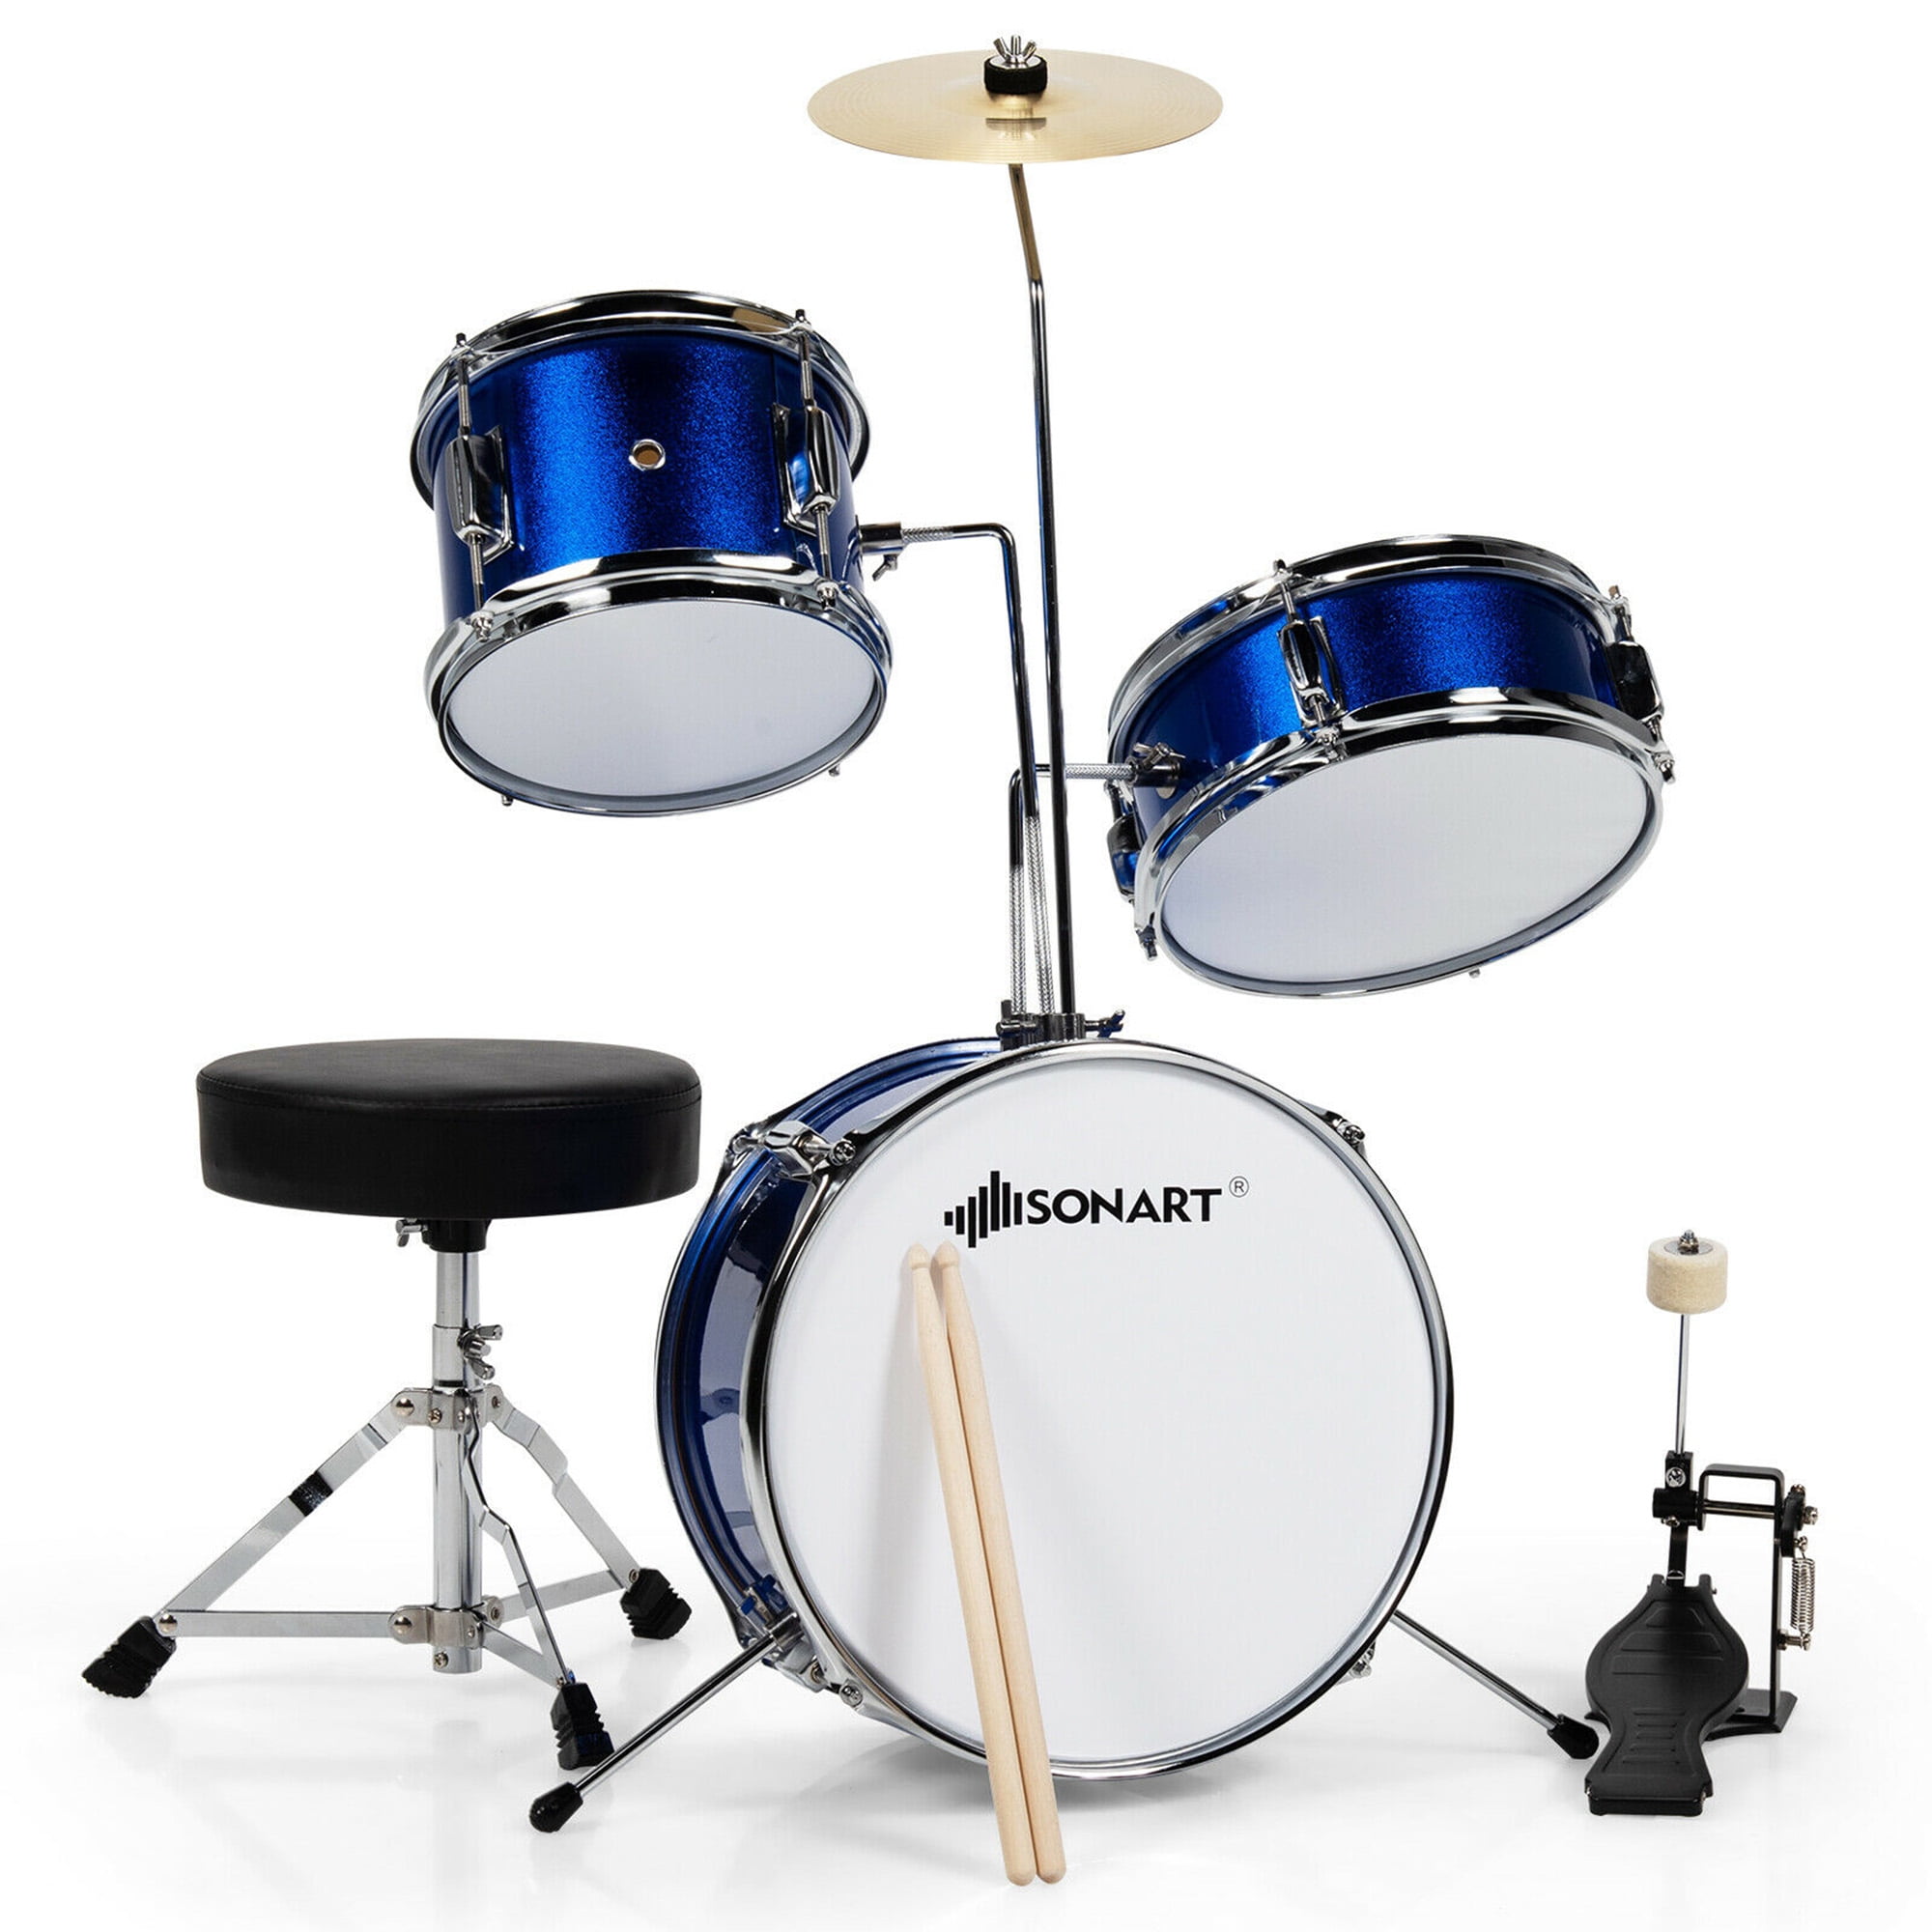 EASTROCK Kids/Junior Drum Set 13 Inch 3 Piece with Adjustable Throne Cymbal Pedal and Drum sticks Black